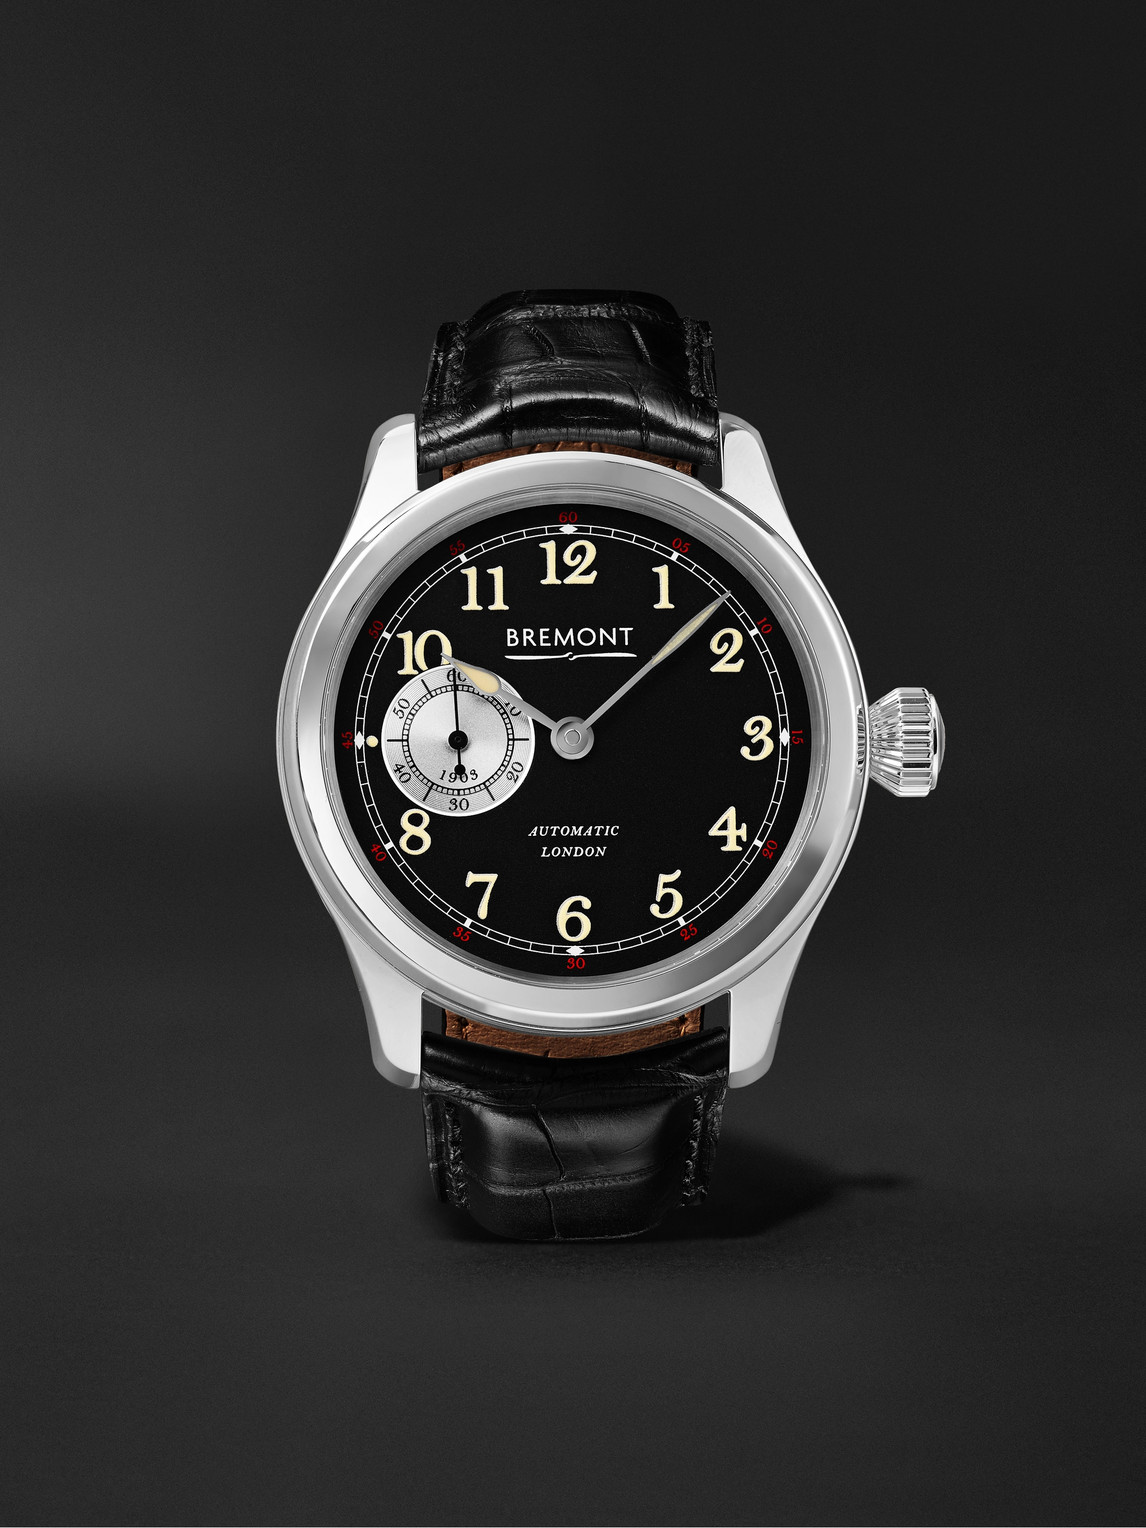 Bremont Wright Flyer Limited Edition Automatic 43mm Stainless Steel And Leather Watch, Ref. No. Wf-ss In Black